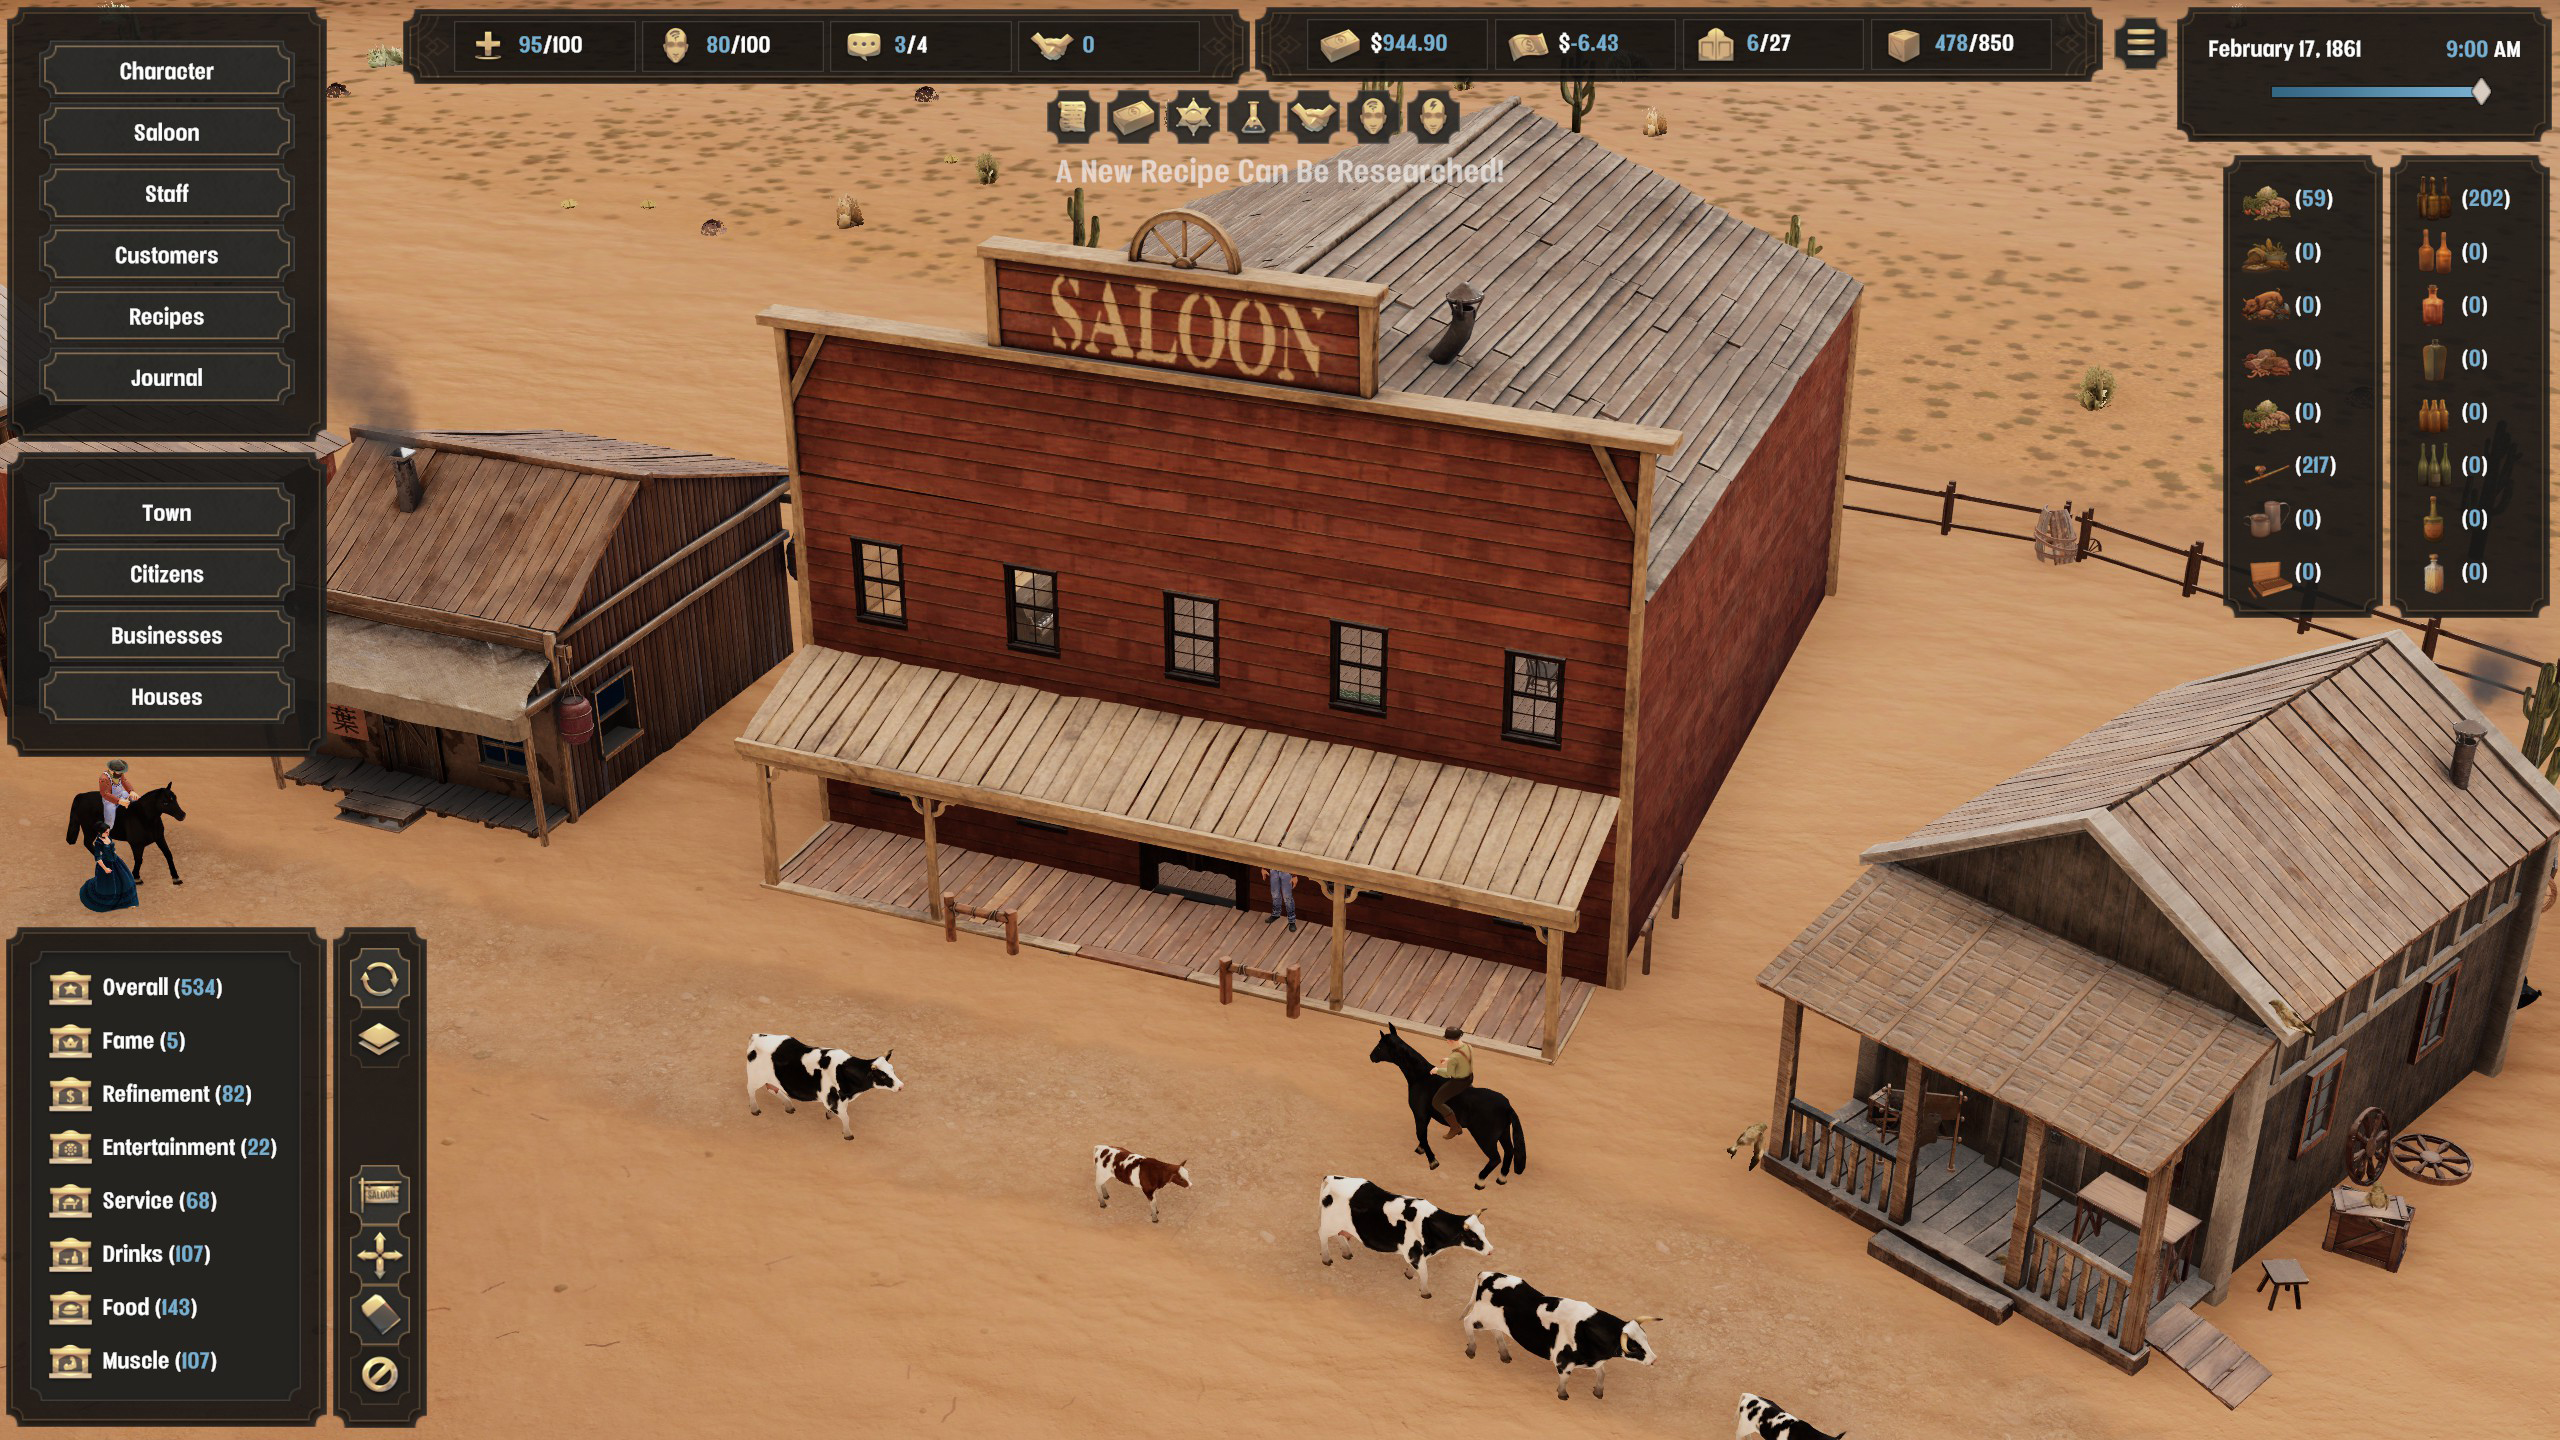 Old West saloon